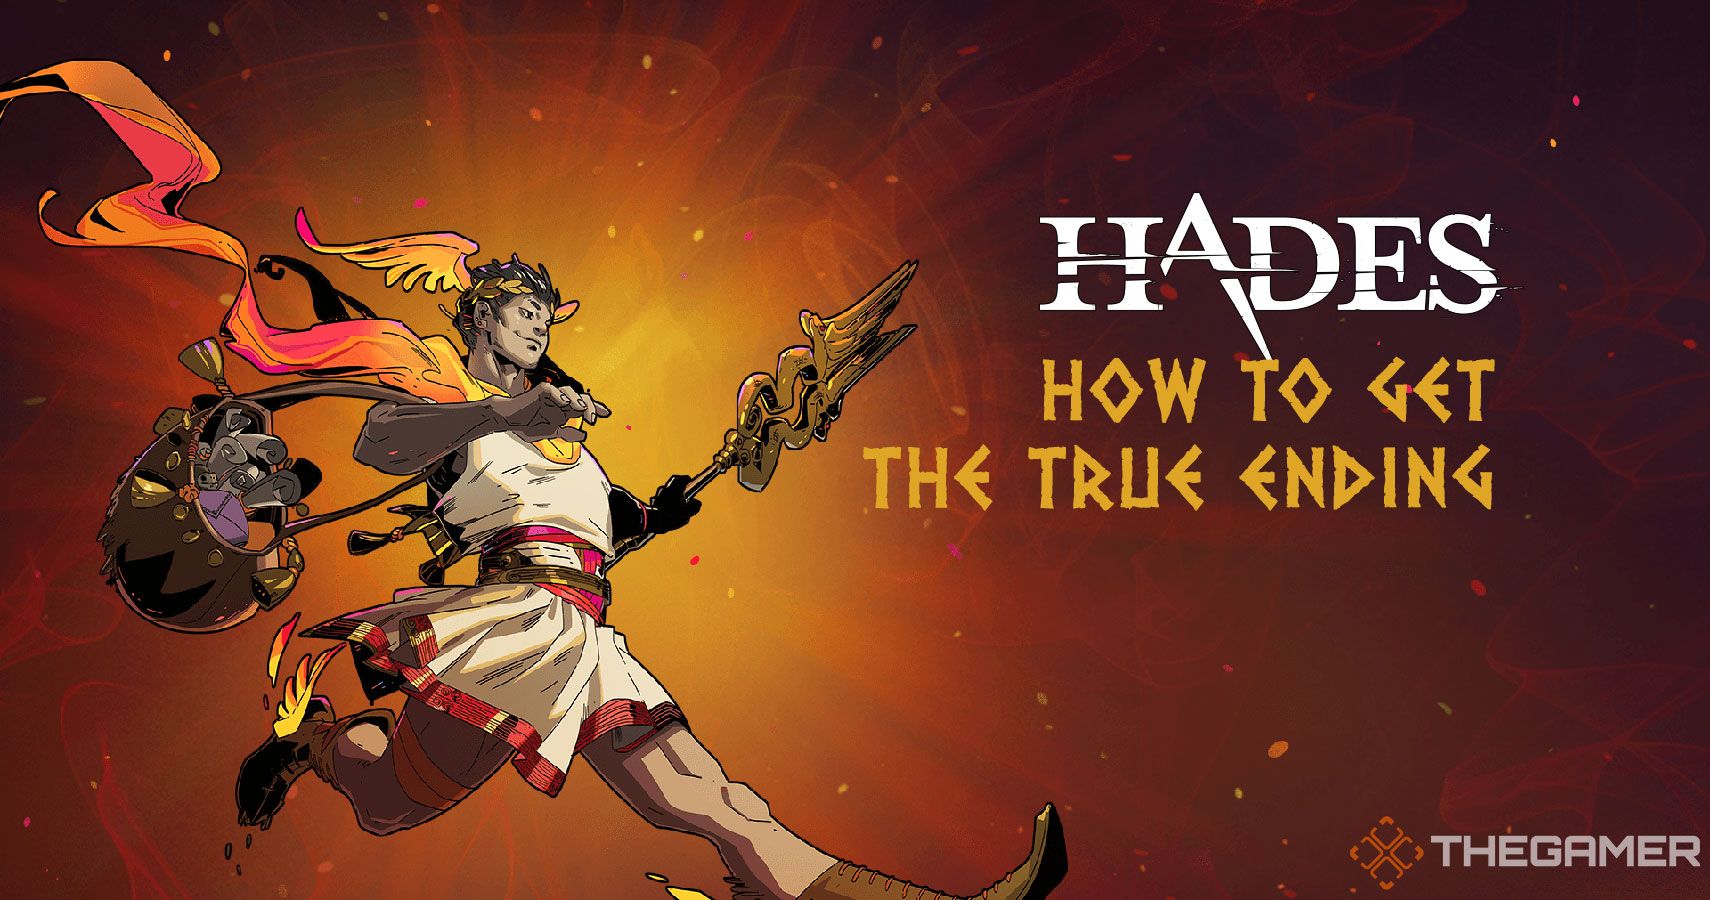 How long is Hades?